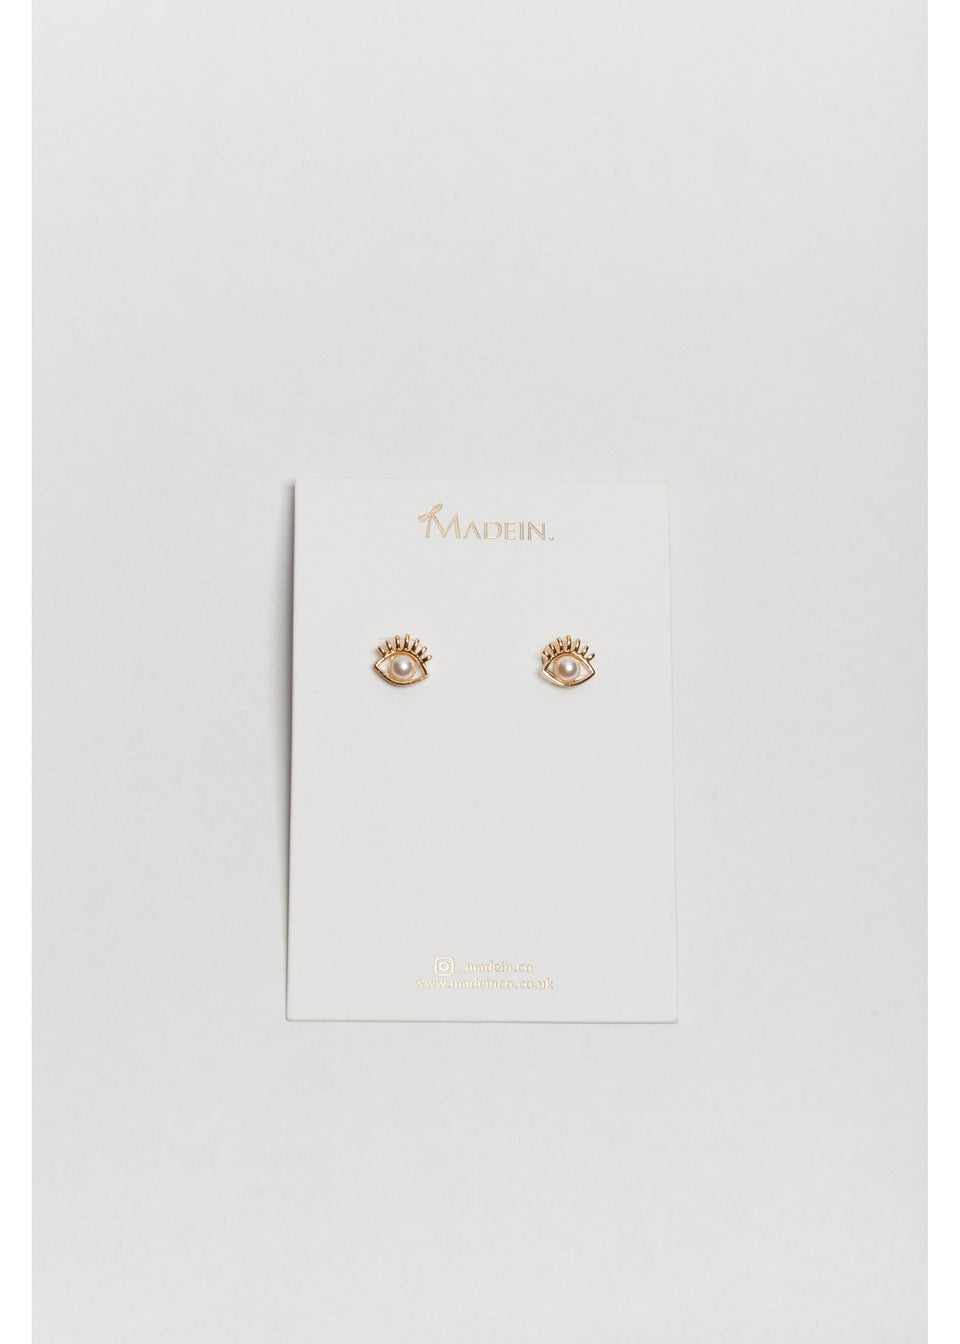 Madein Gold And Ivory Evil Eye Pearl Earrings